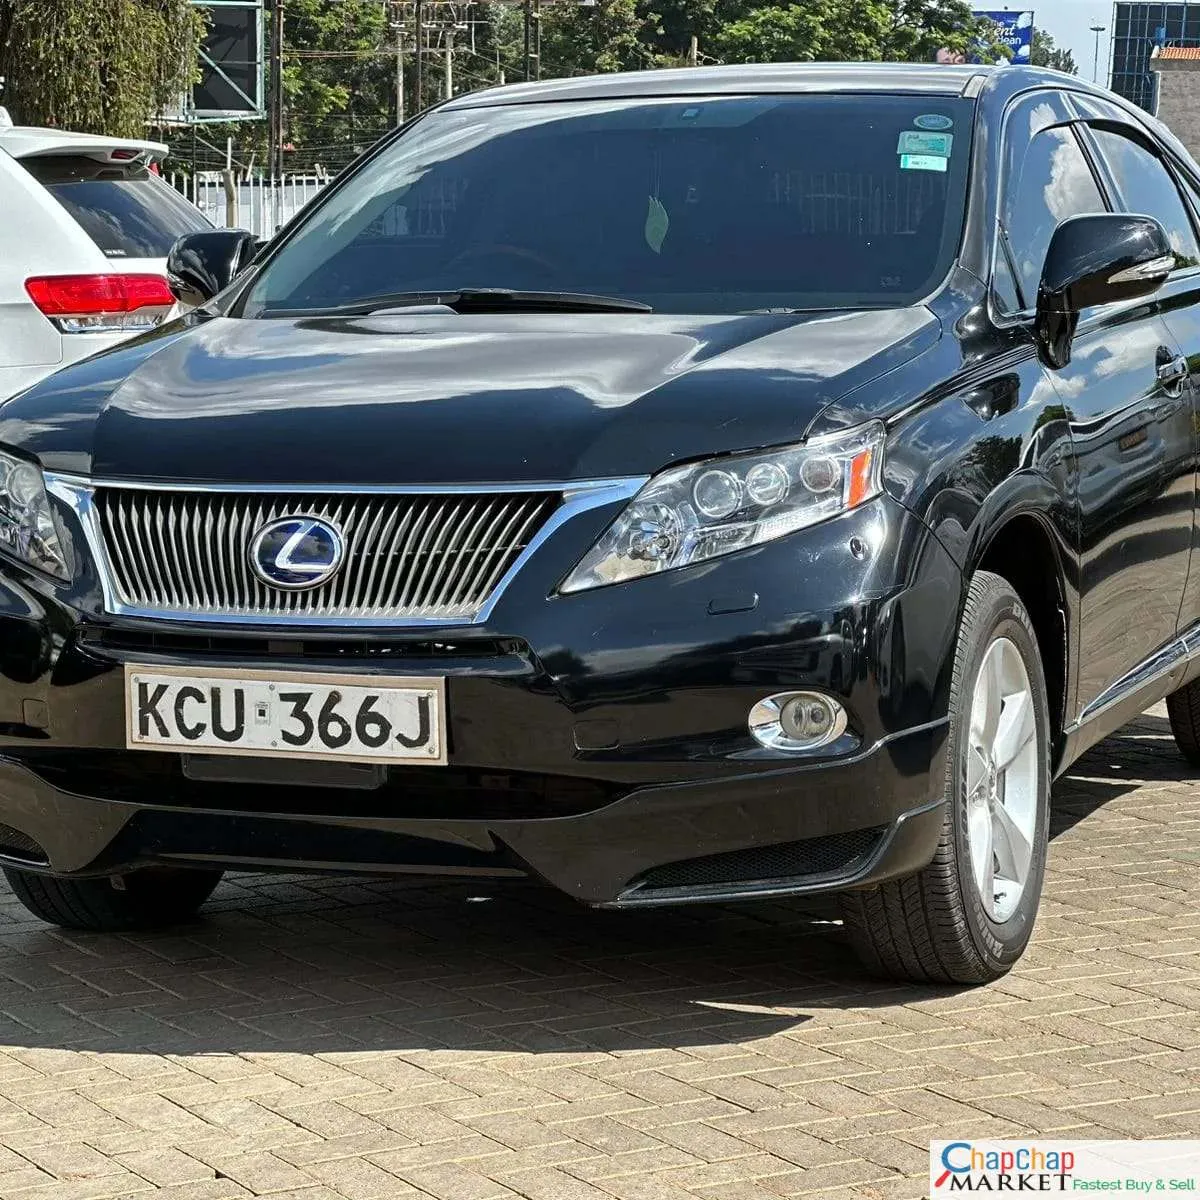 LEXUS RX 450h hybrid SUNROOF 🔥 You Pay 30% Deposit Trade in OK EXCLUSIVE Lexus rx 450 For Sale in Kenya hire purchase installments